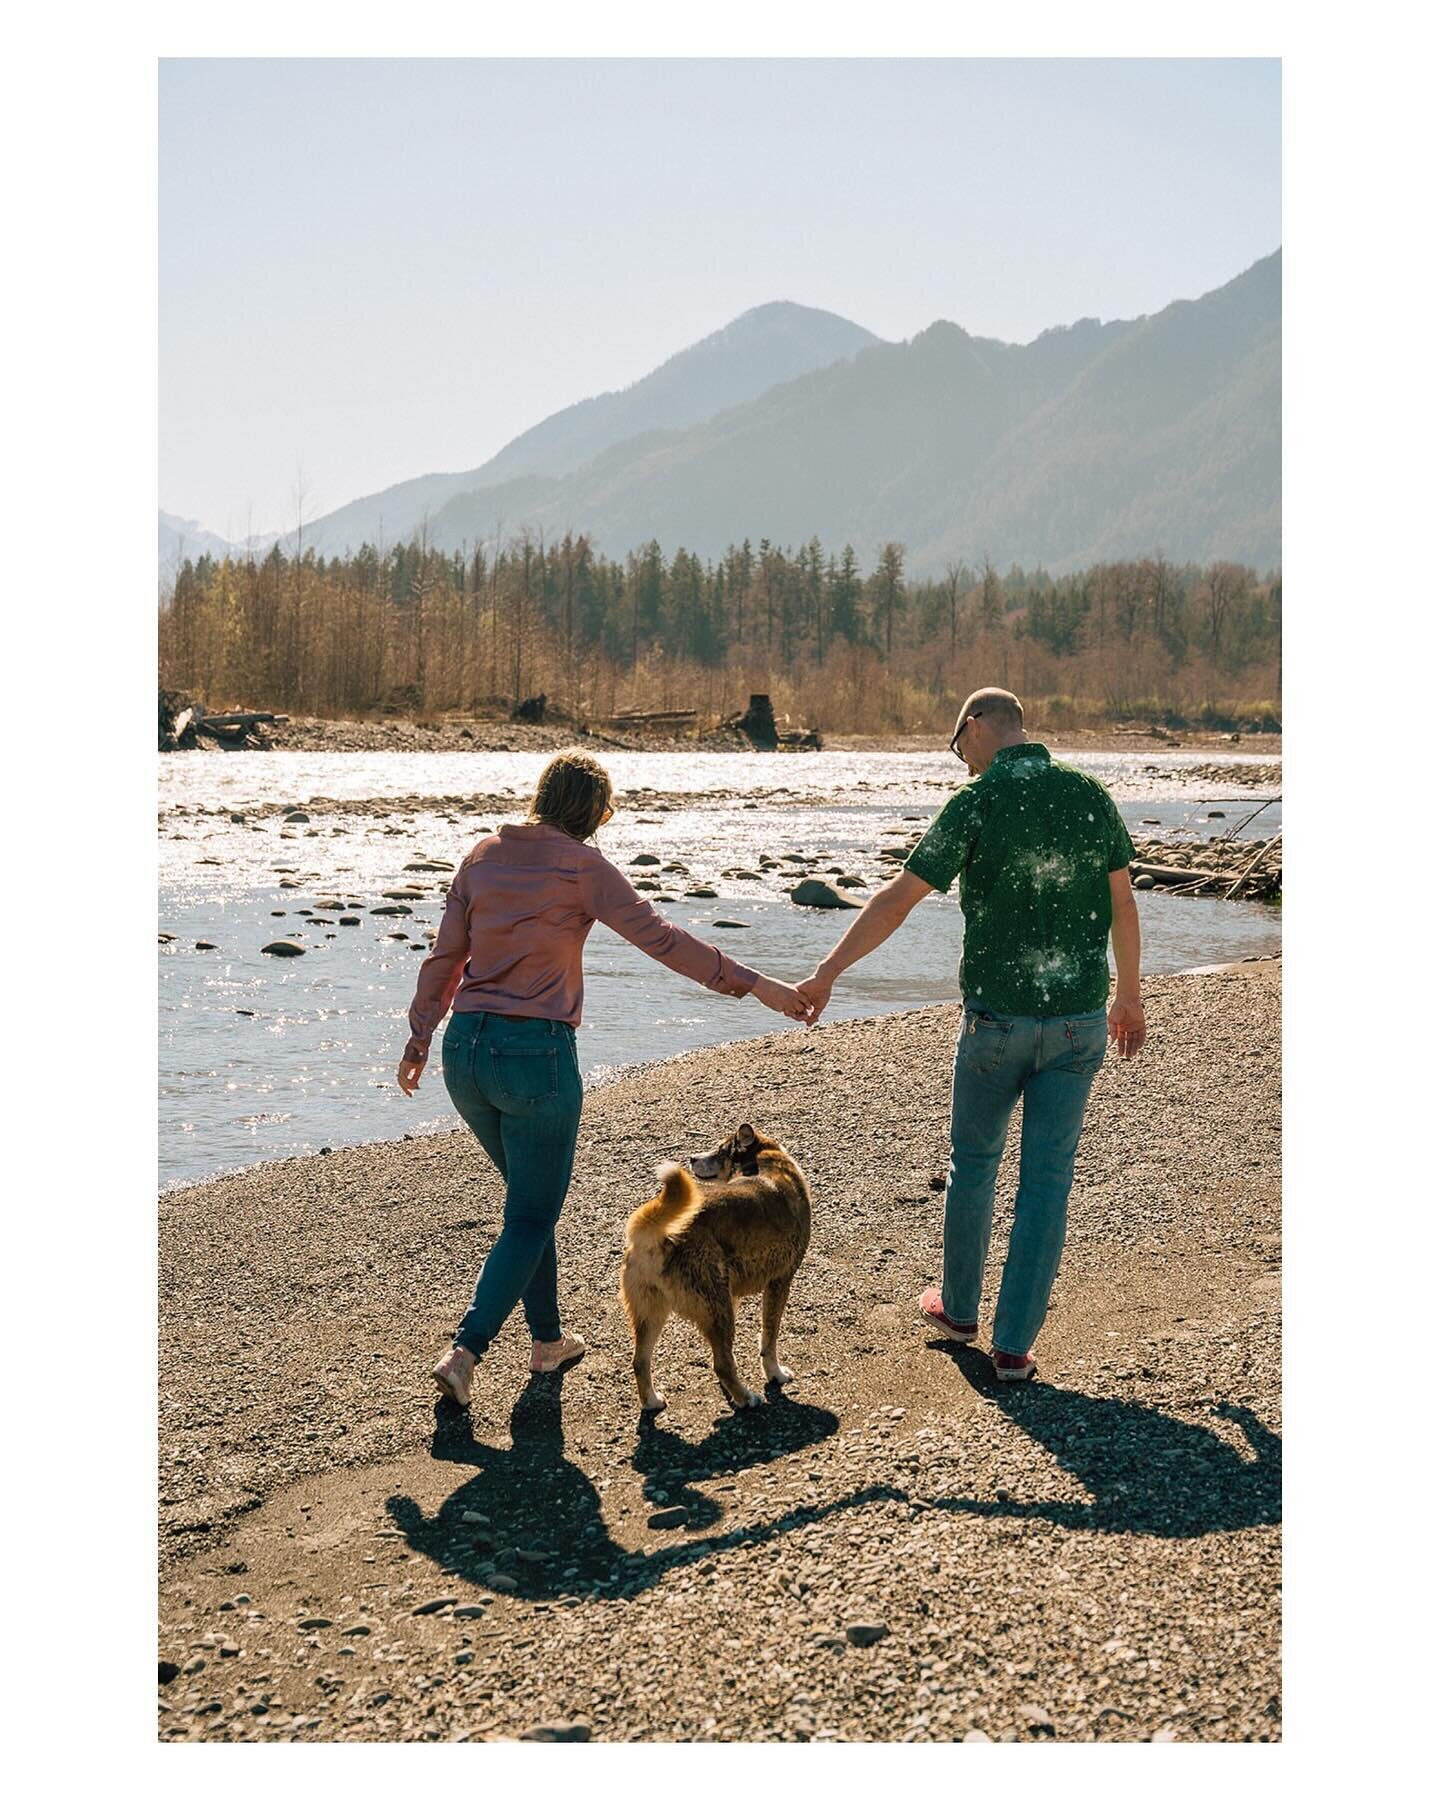 If you have a dog, please consider bringing them with when we take your photos. 🥹

When Brianna and Matt first reached out, we knew we wanted to become friends with them right away. They met and lived in Winthrop, WA, (one of our favorite places and